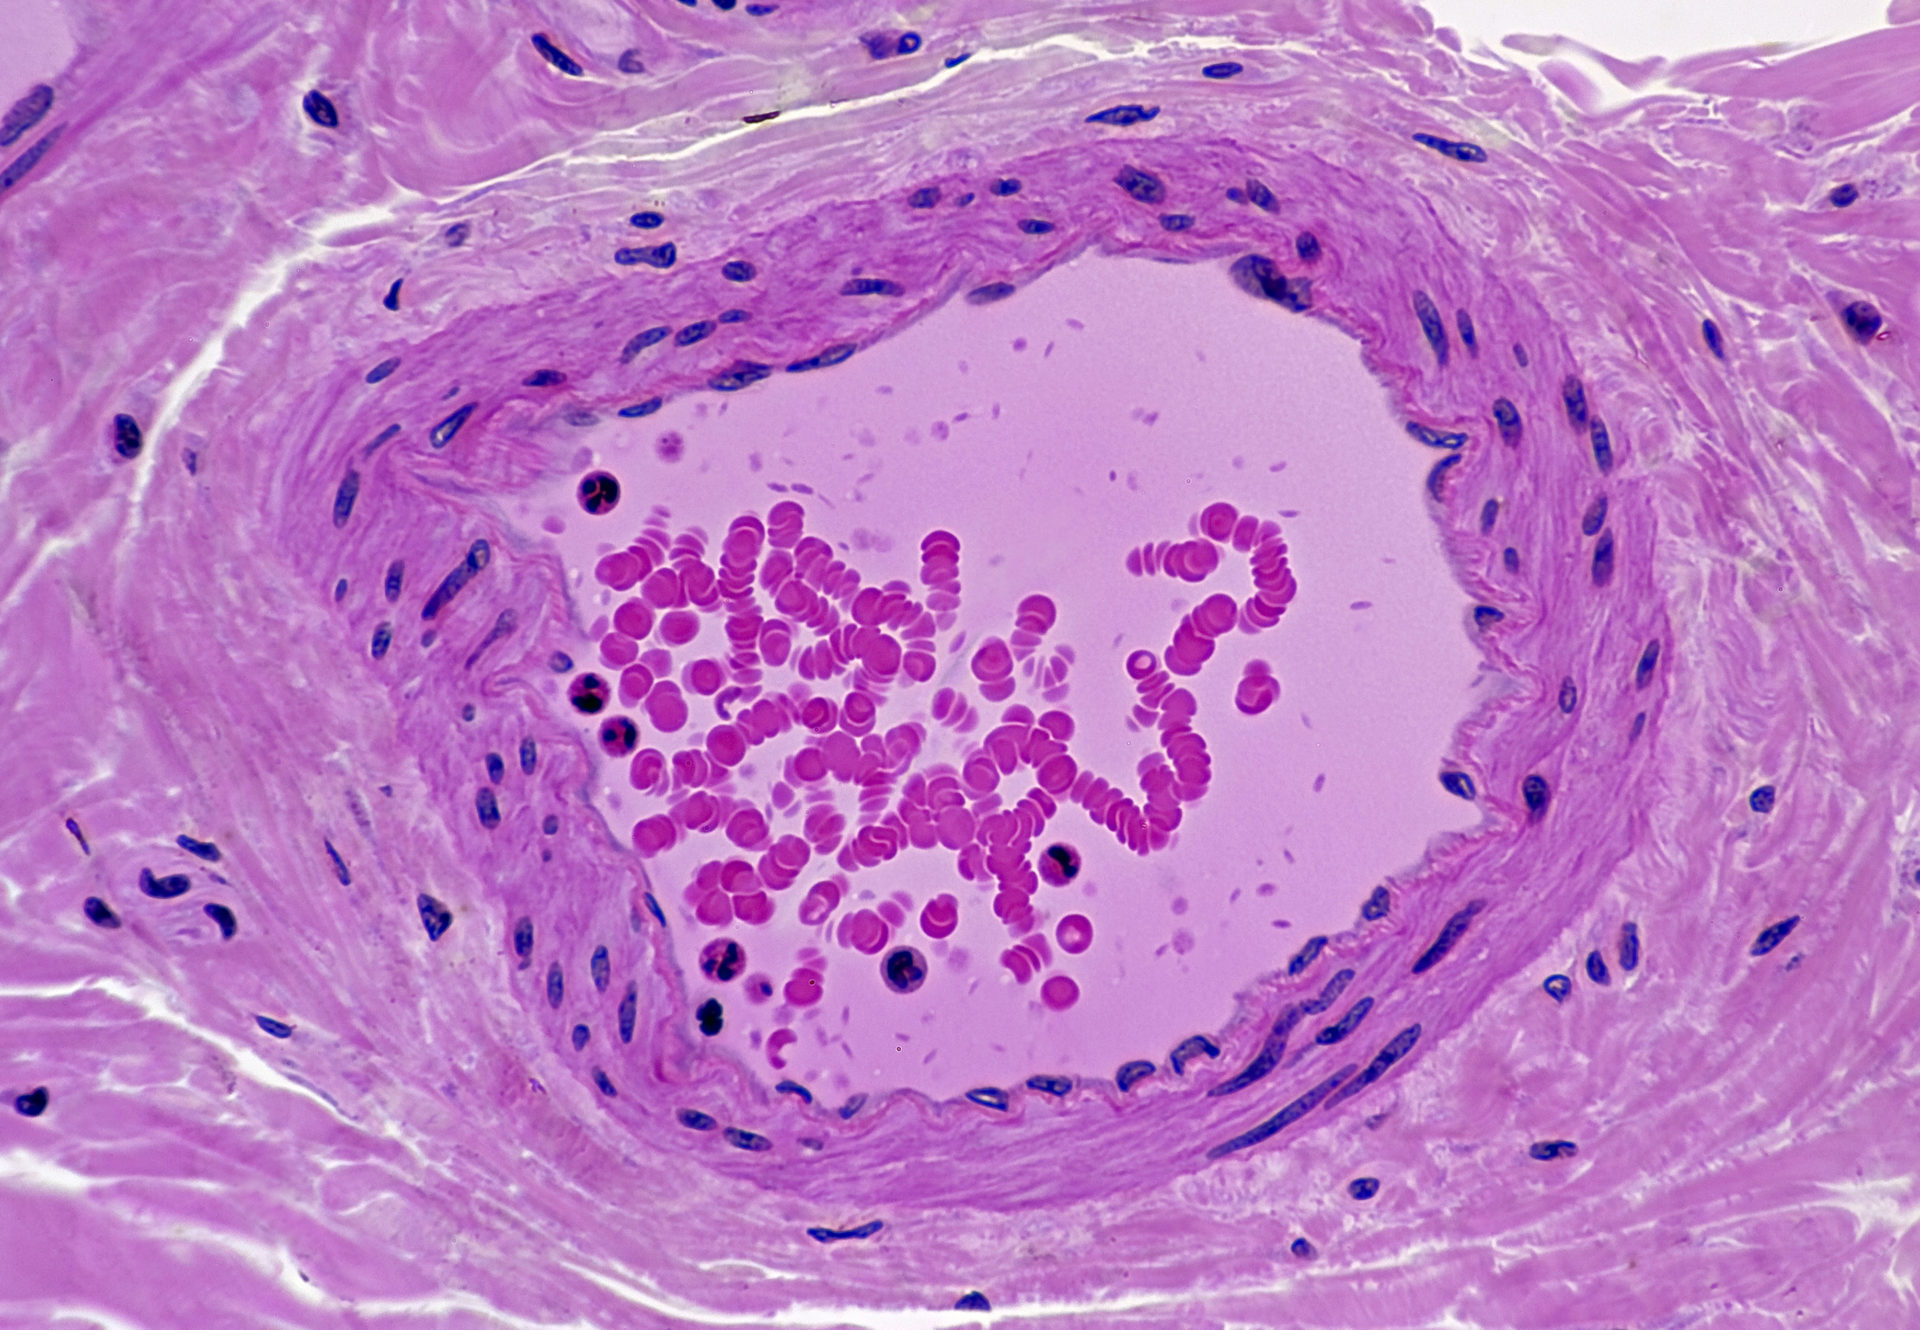 Normal Artery in Cross Section (Magnification x100) H & E stain. Three distinct layers or tunics: tunica interna (intima), tunica media, tunica externa (adventitia). Also shows endothelium and lumen with red and white blood cells.